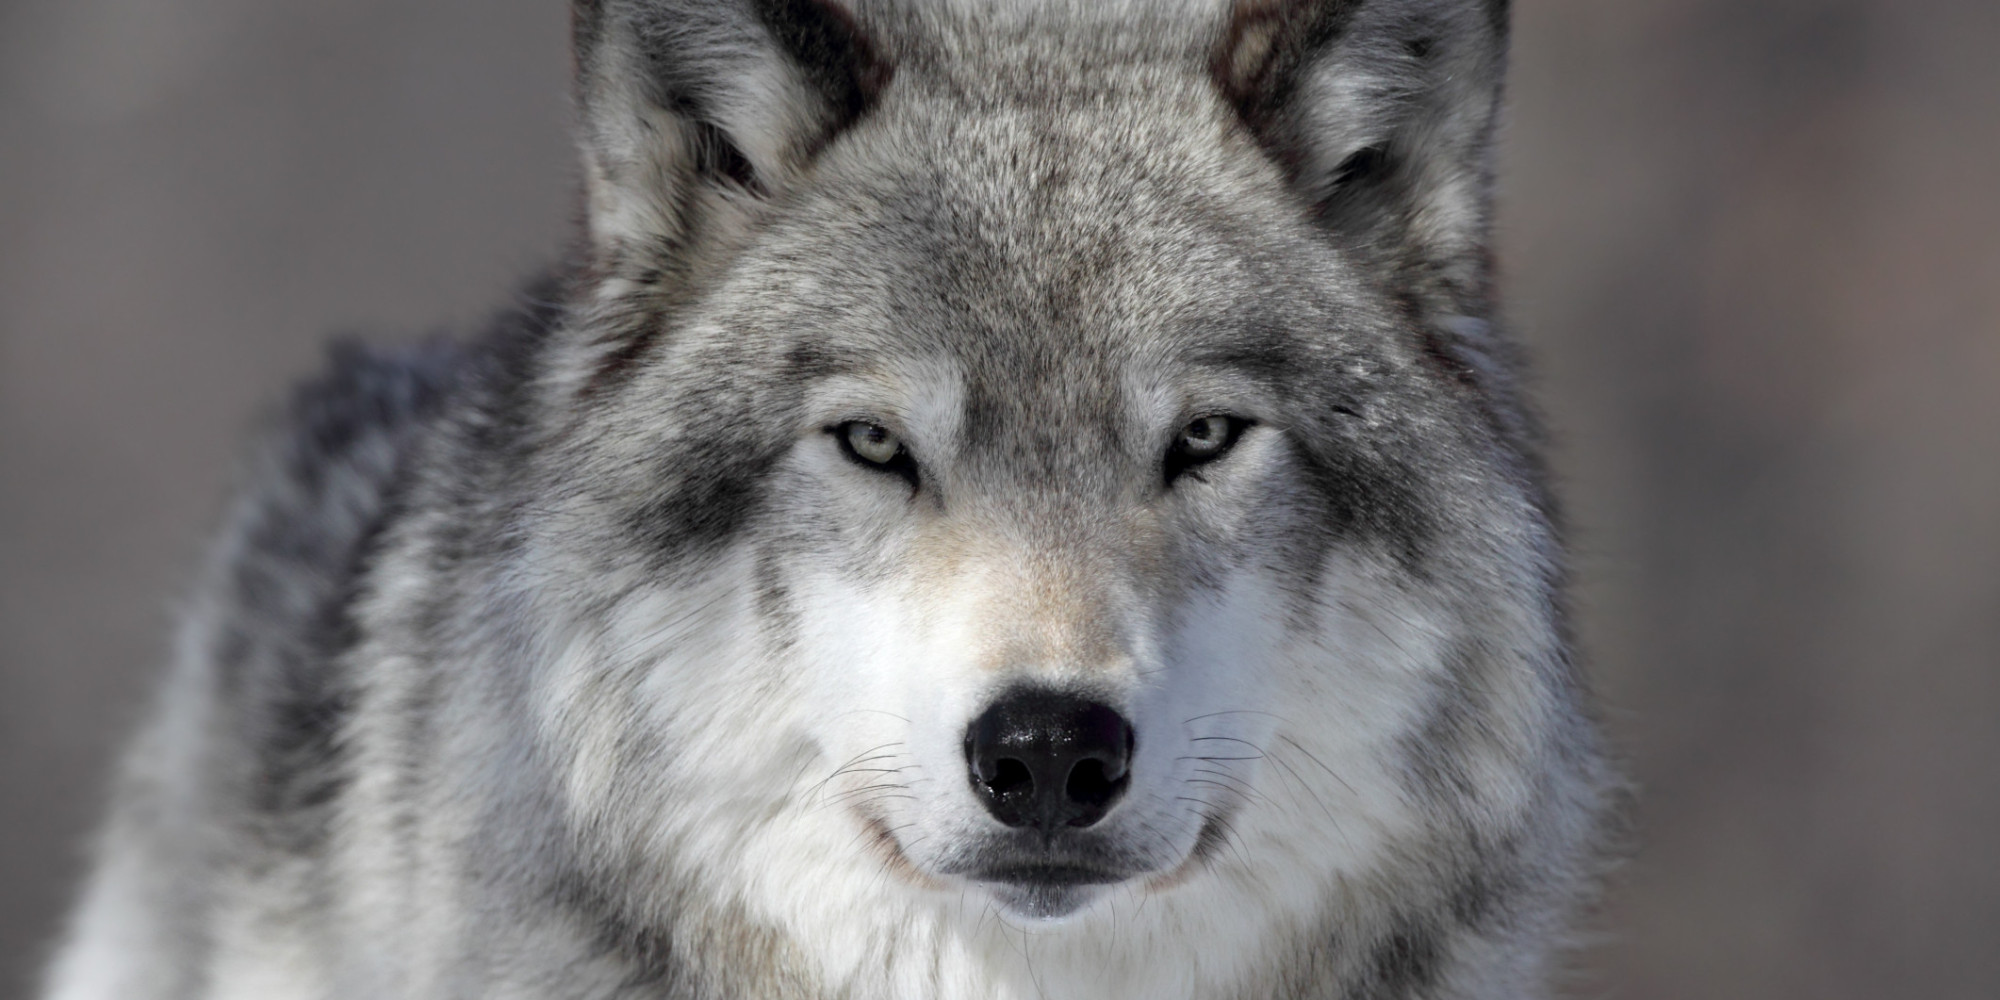 Oregon Retreats From Wolf Protection, as Possible Setup for Trophy ...